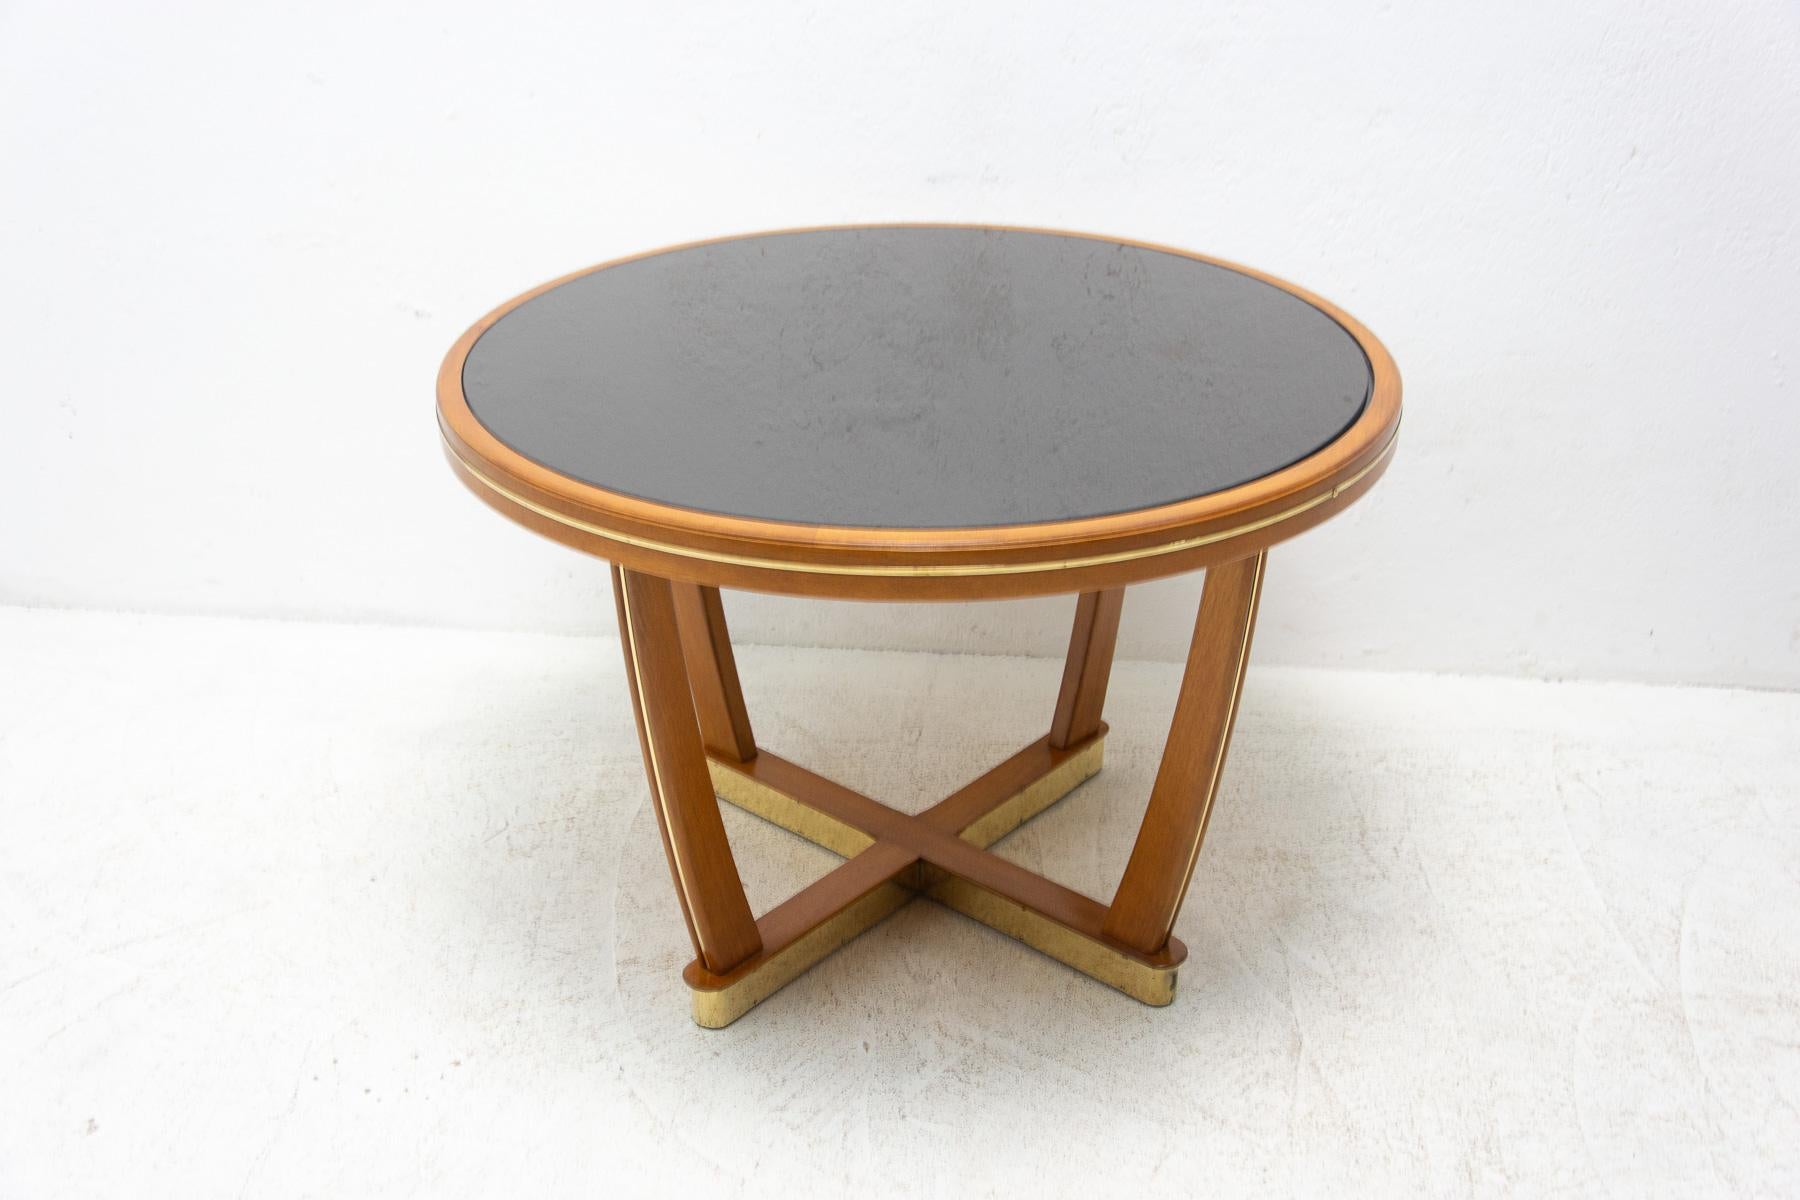 Mid-century coffee table, made by Ilse Möbel in Germany in the 1950's.

Made of beech wood, brass, black glass on the top.

In very good condition, fully renovated.

Measures: height 60 cm, diameter 90 cm.